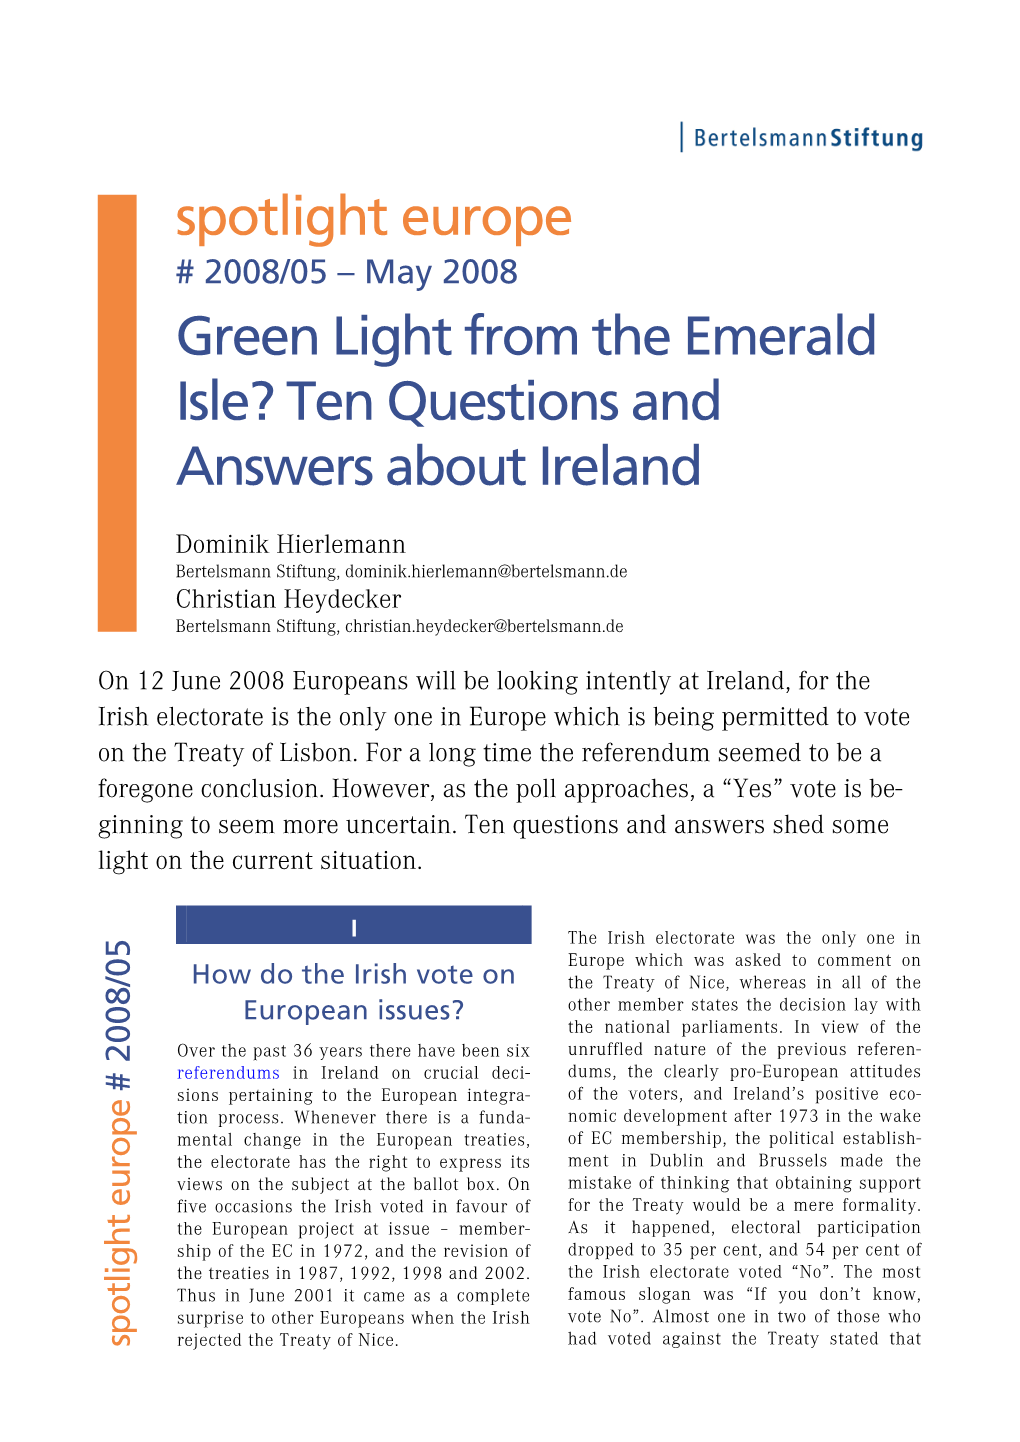 Spotlight Europe # 2008/05 – May 2008 Green Light from the Emerald Isle? Ten Questions and Answers About Ireland